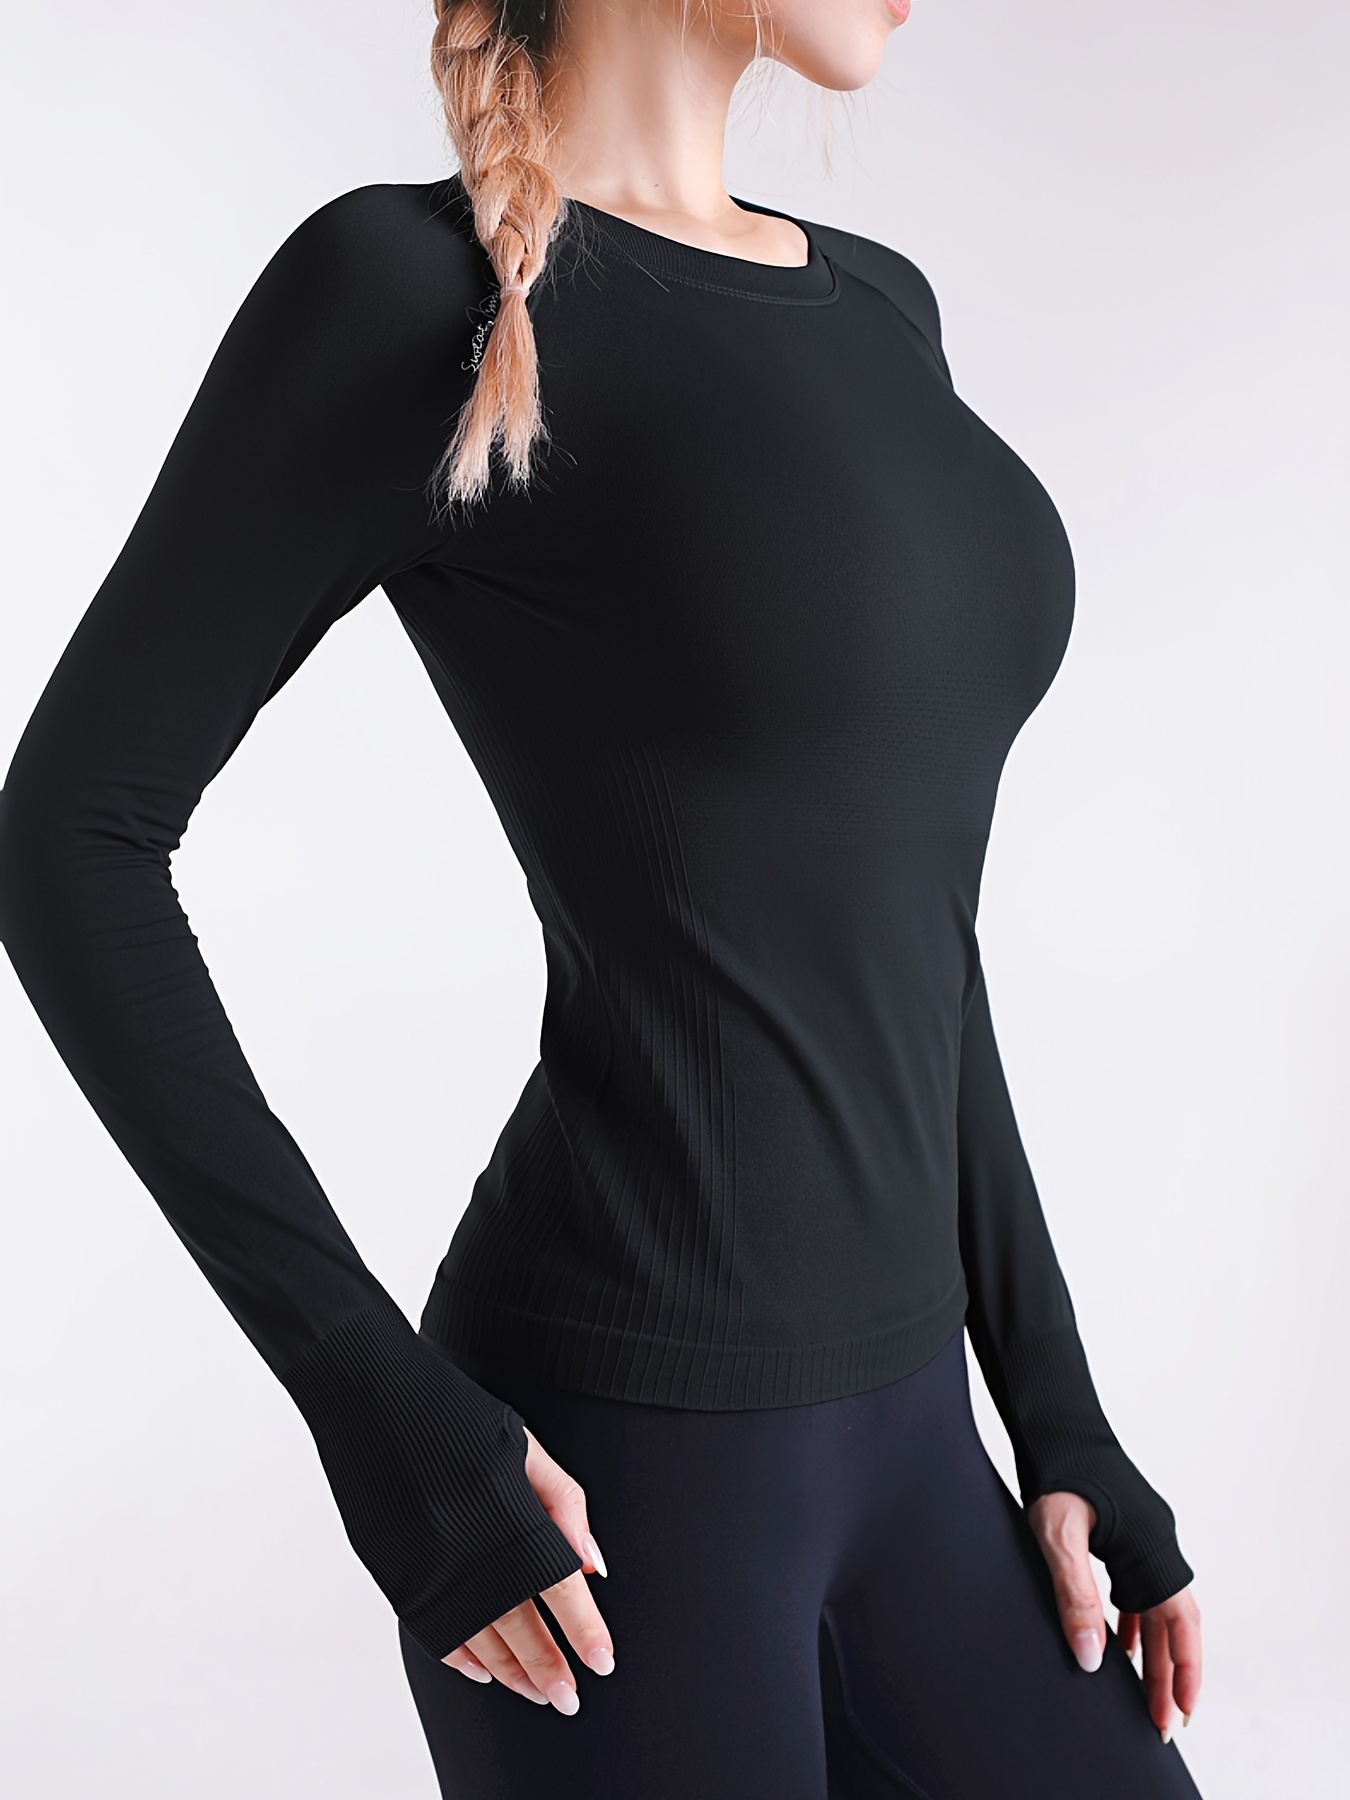 IROINNID Savings Dry Fit Shirt Women Long Sleeve Gym Clothes for Women  Sports Underwear Fall Yoga Wear Running Back Training Shock-proof Vest  Breasted